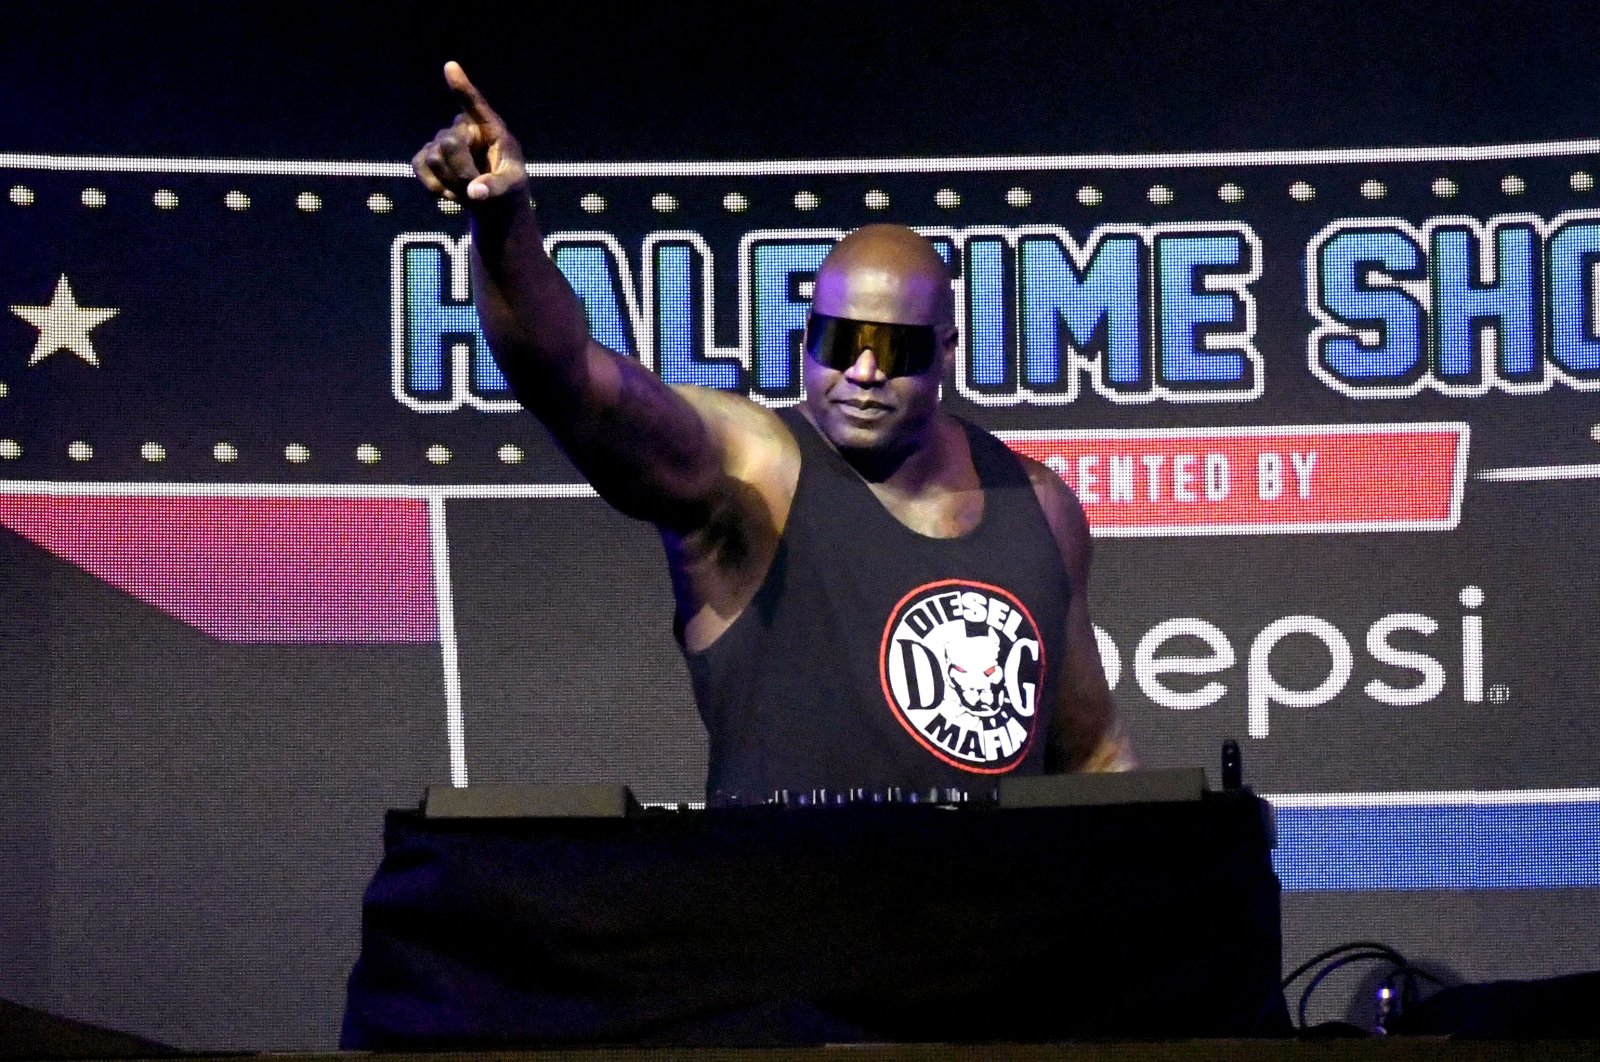 Shaquille O'Neal performs as DJ Diesel at The SHAQ Bowl for Super Bowl LV, in Tampa, Florida, Feb. 07, 2021. (AFP Photo)